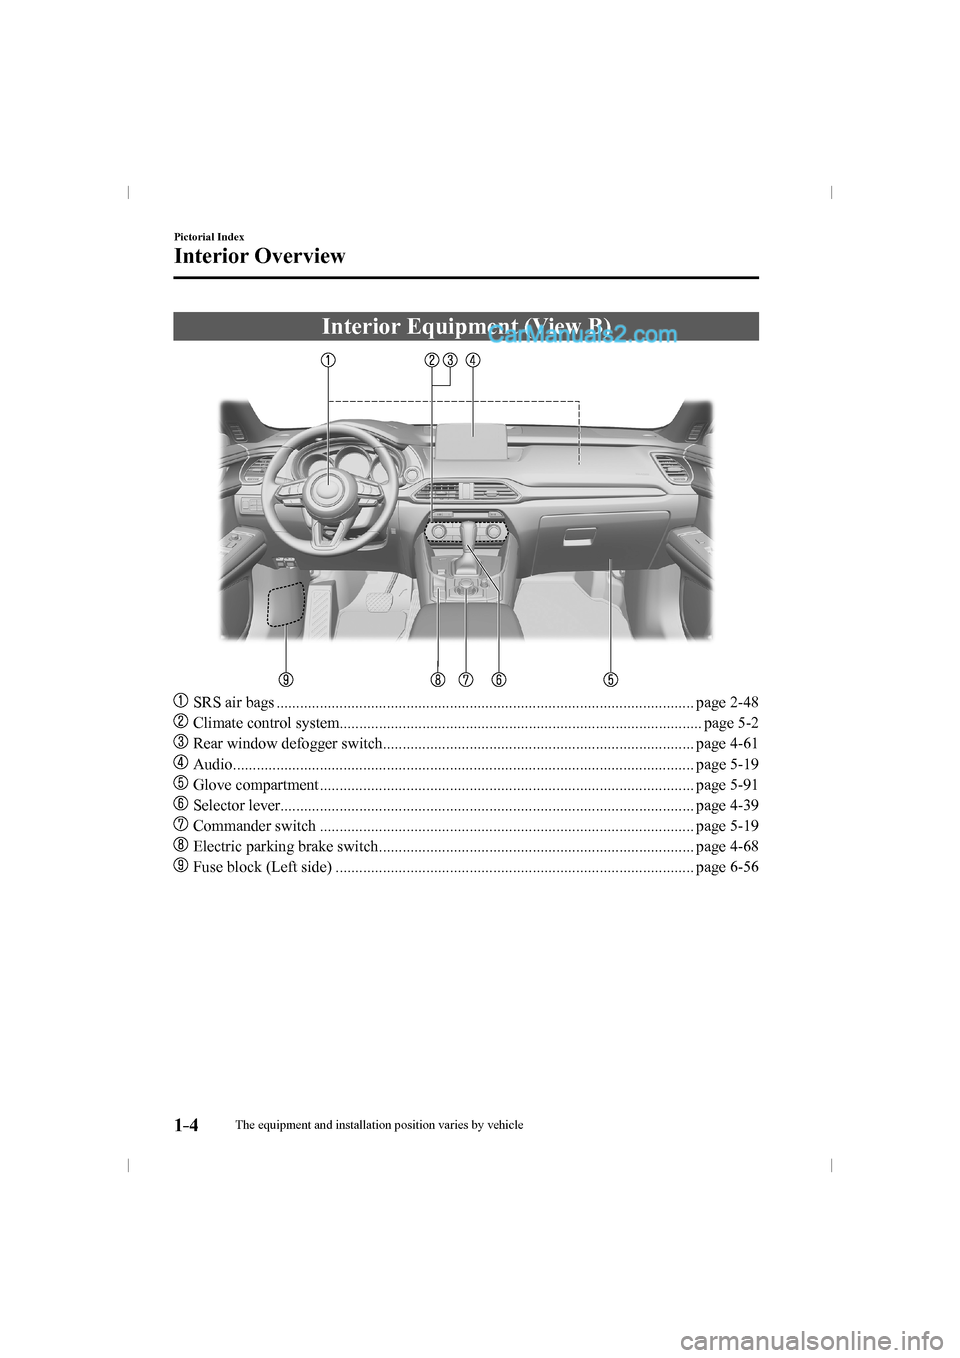 MAZDA MODEL CX-9 2016  Owners Manual (in English) 1–4
Pictorial Index
Interior Overview
 Interior Equipment (View B)
    
���
  SRS air bags ........................................................................................................